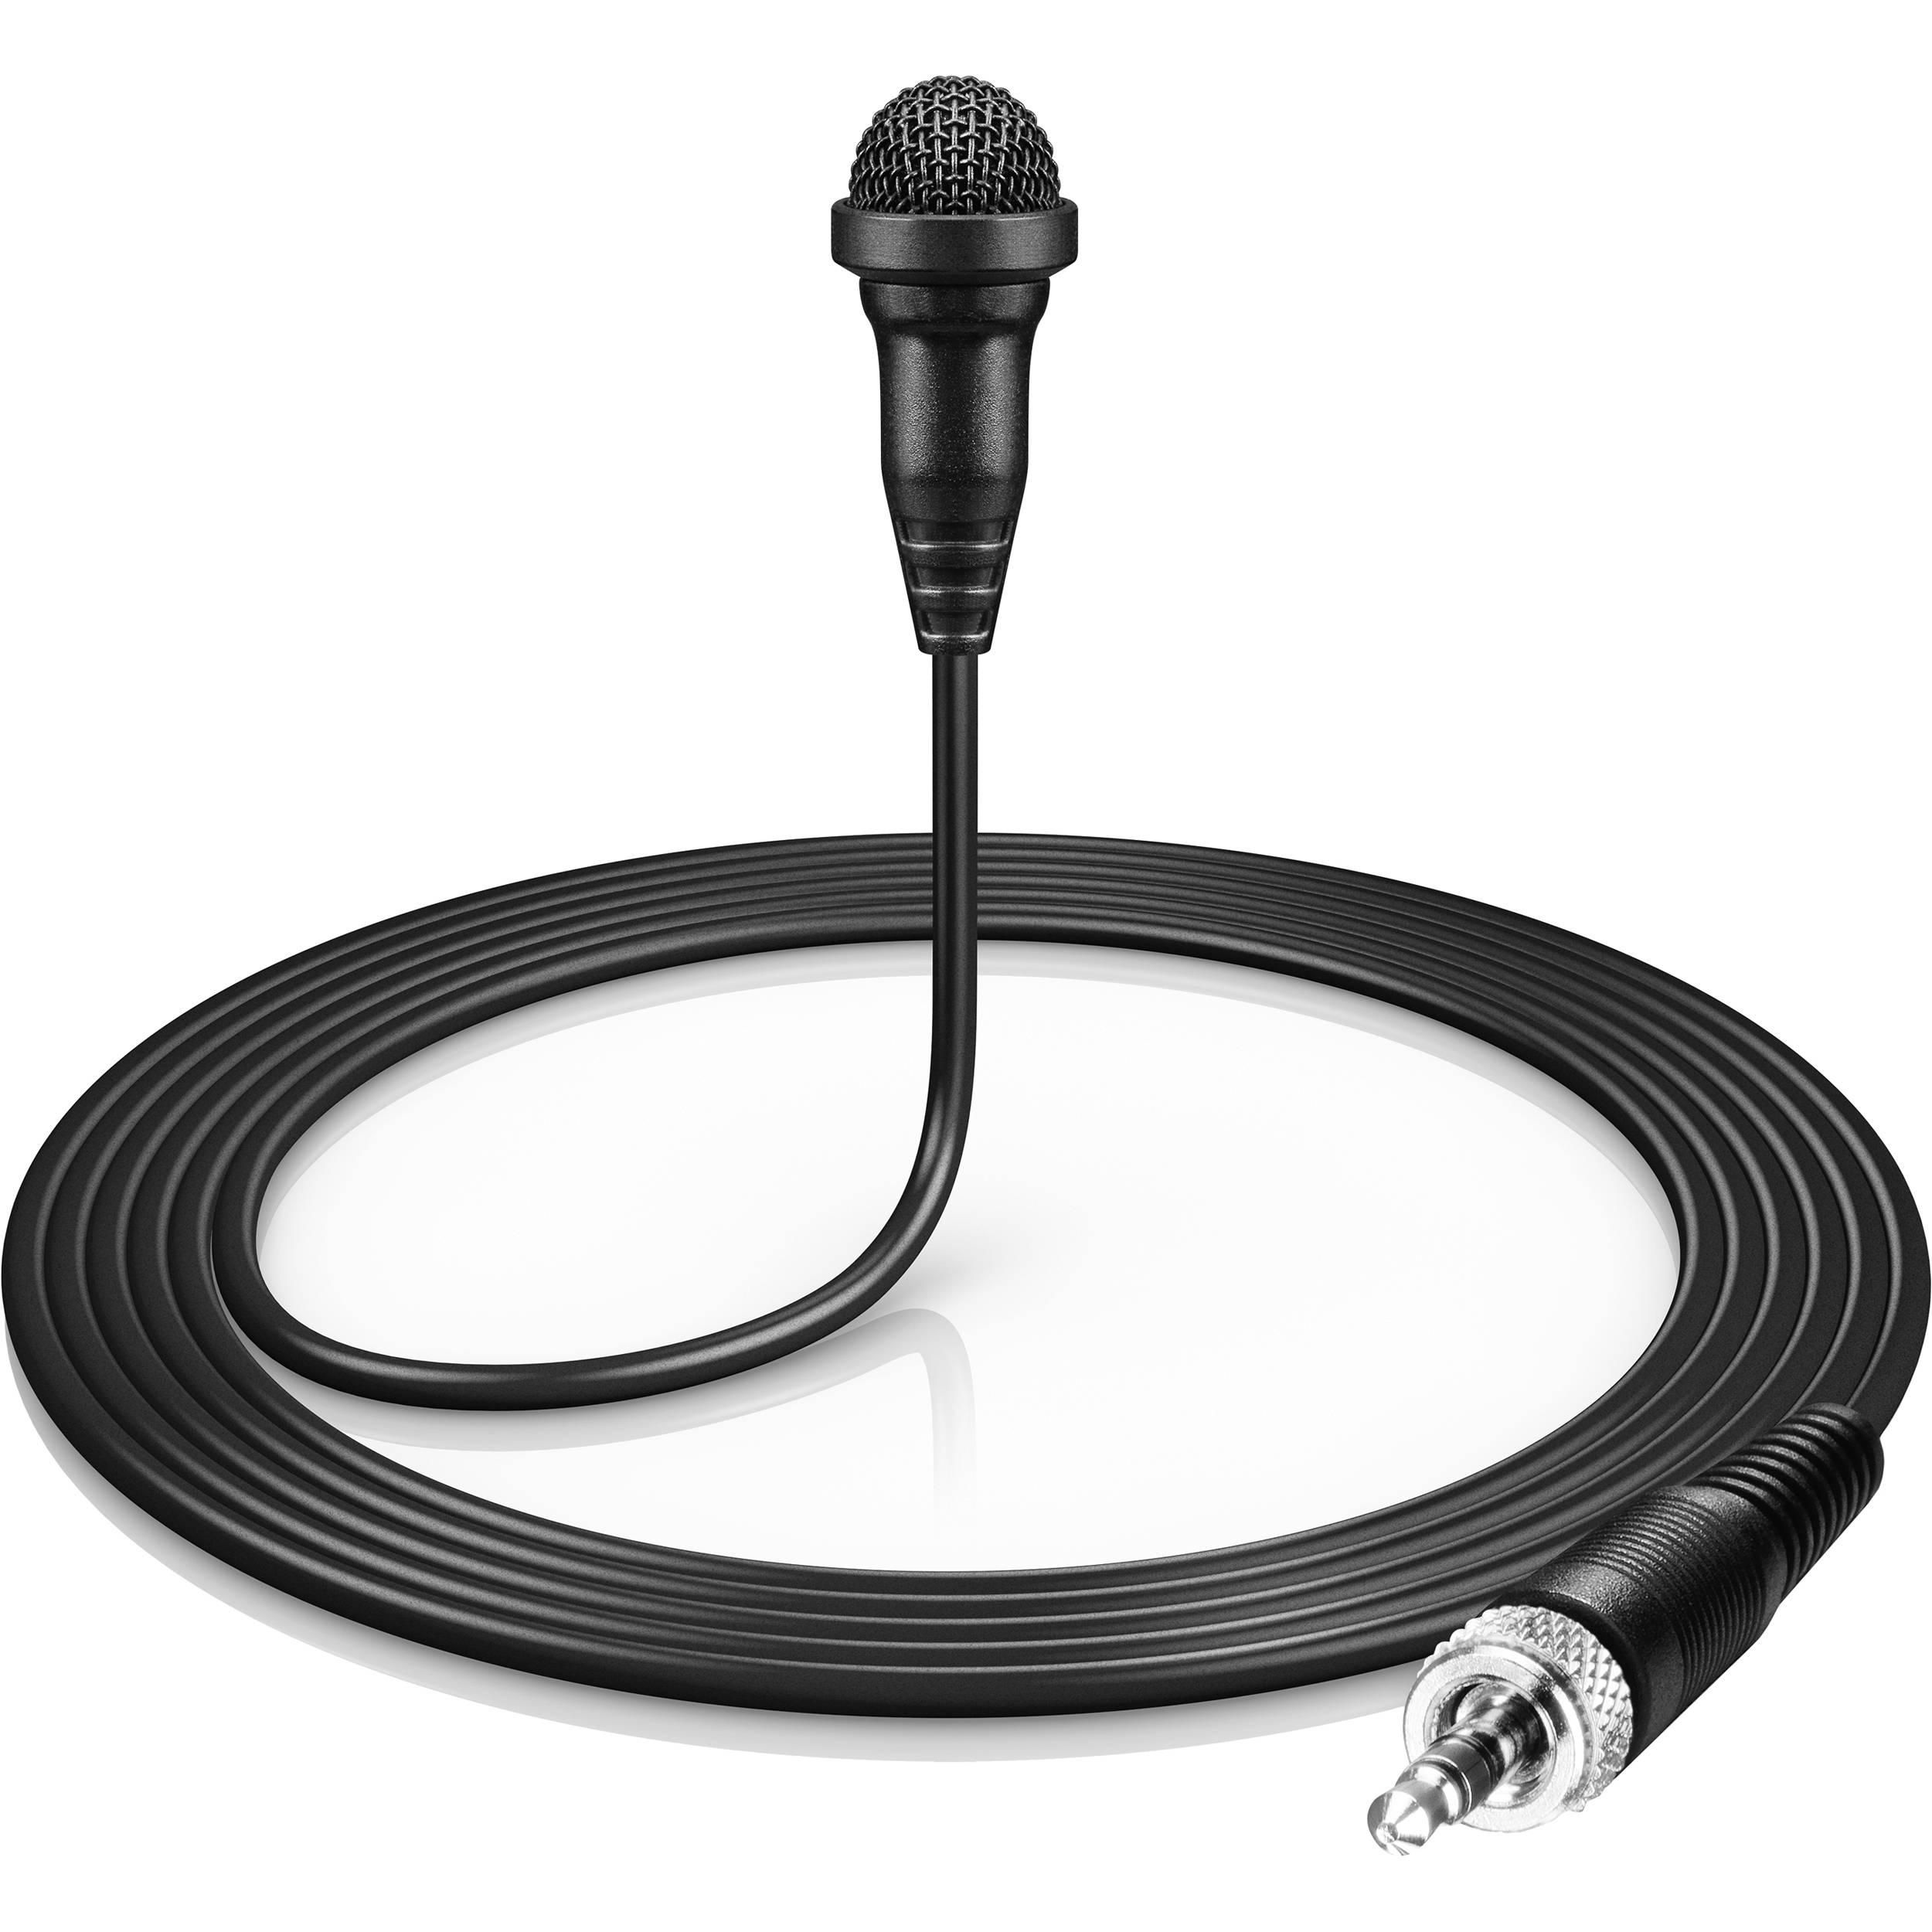 Best Lavalier Microphone For Mac